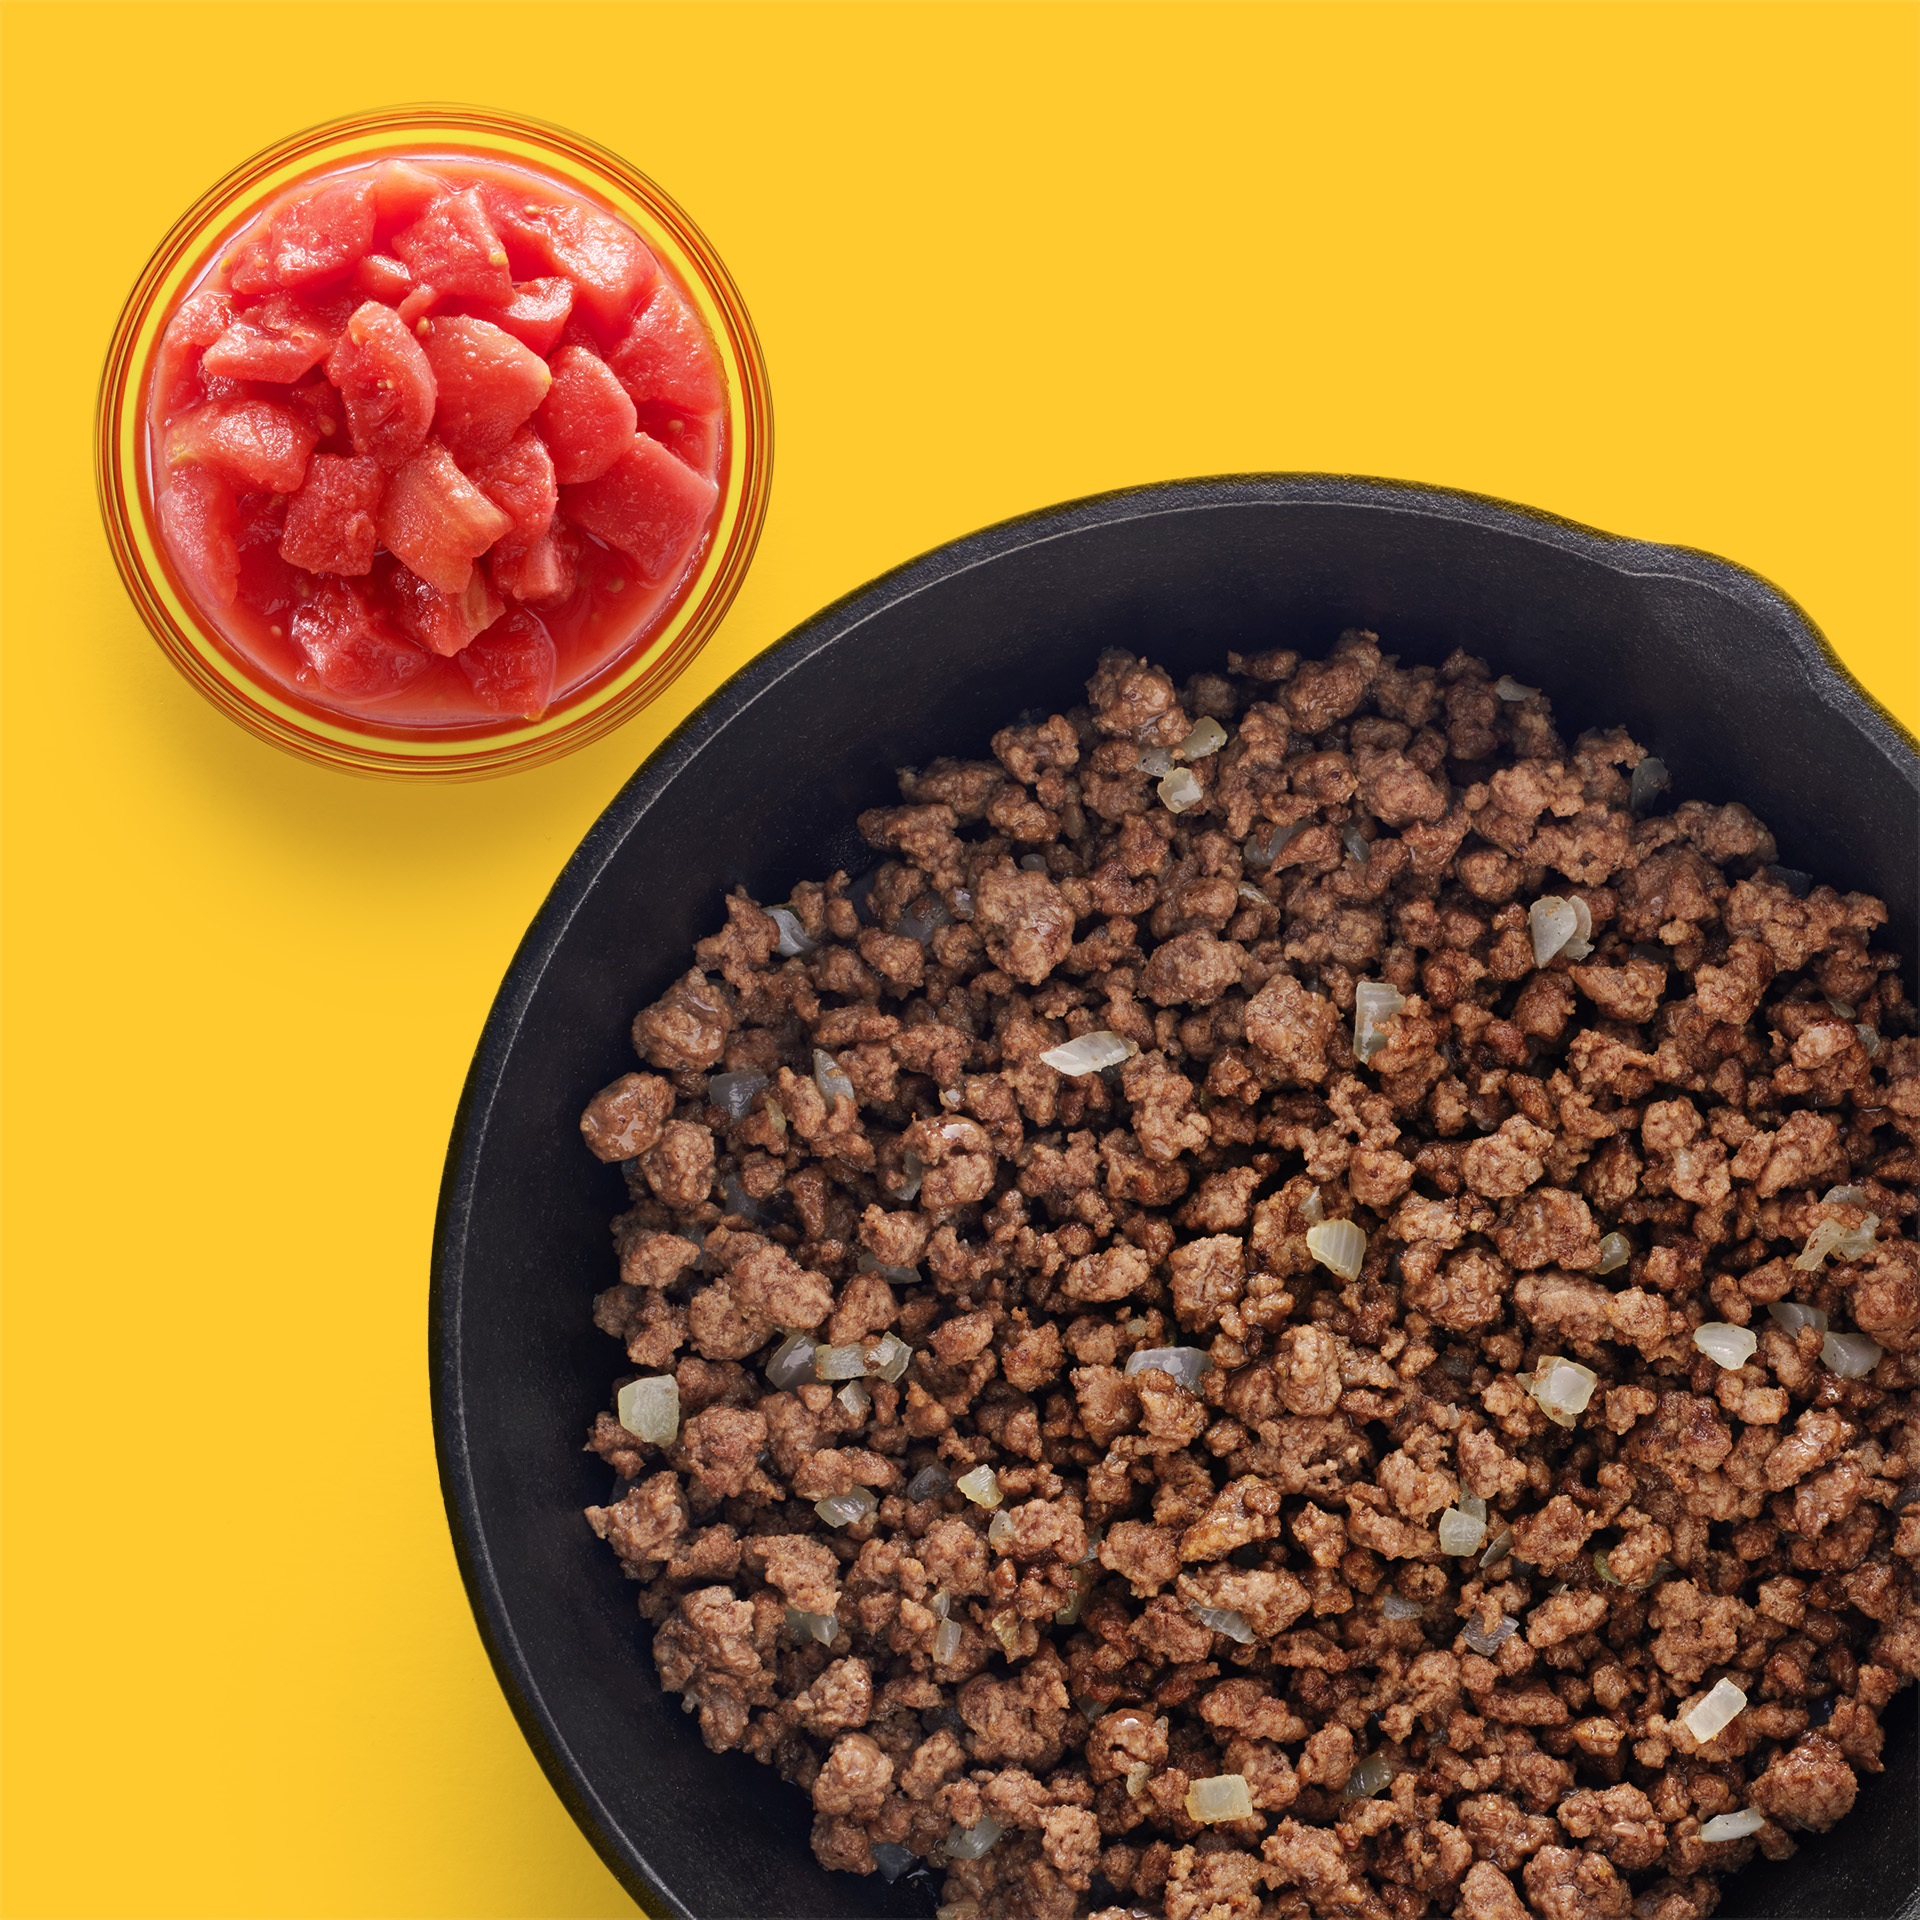 Cast iron pan full of browned ground beef with a yellow background and a side of tomatoes.